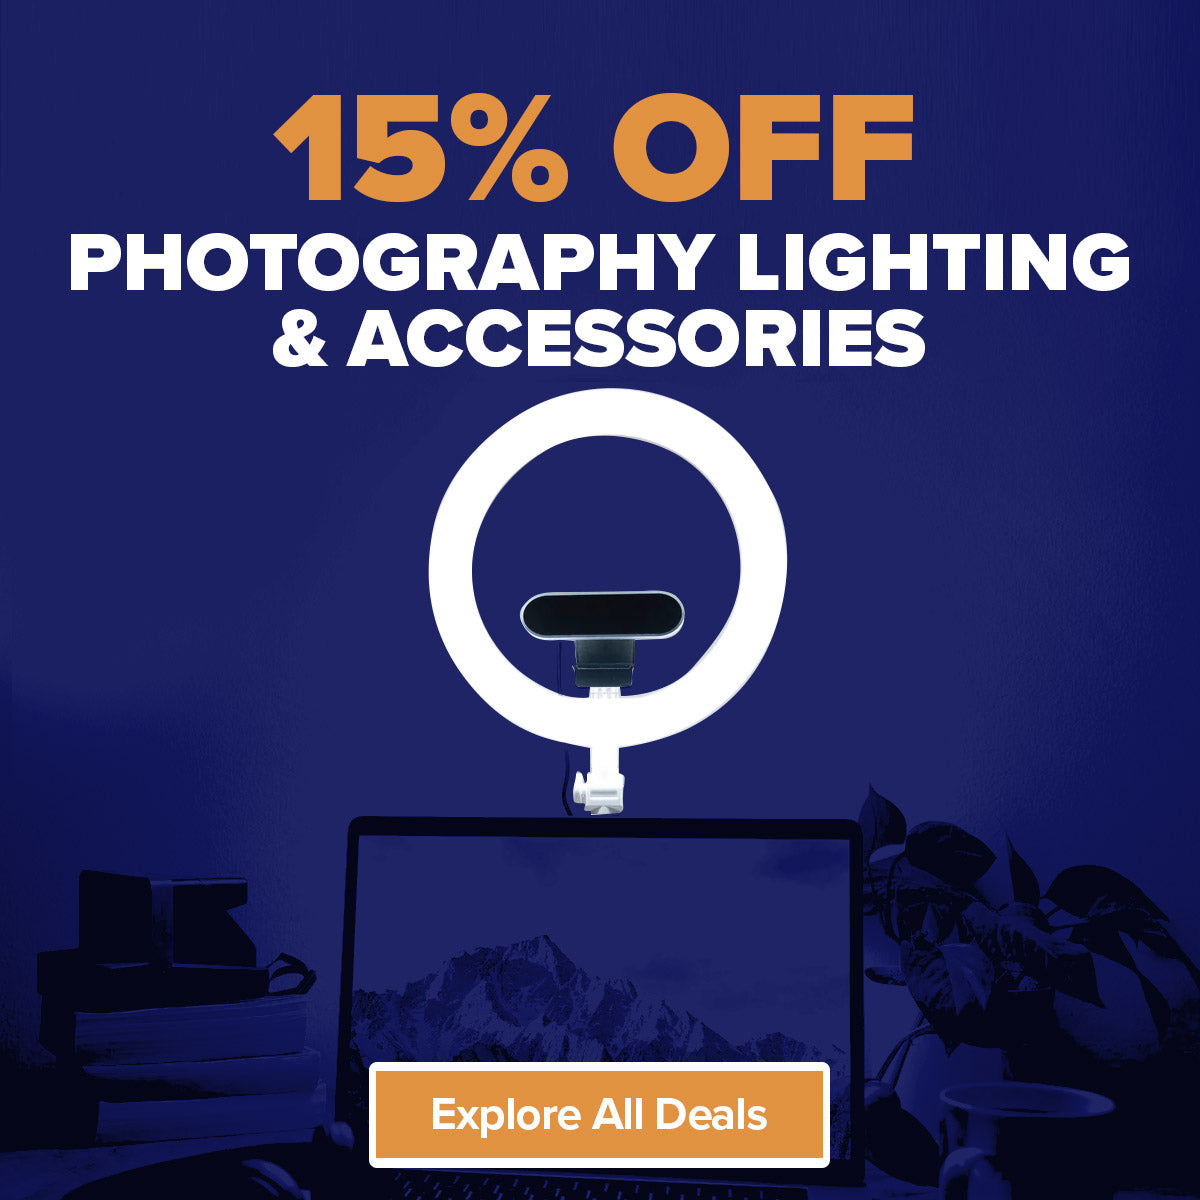 15% off Photography Lighting & Accessories